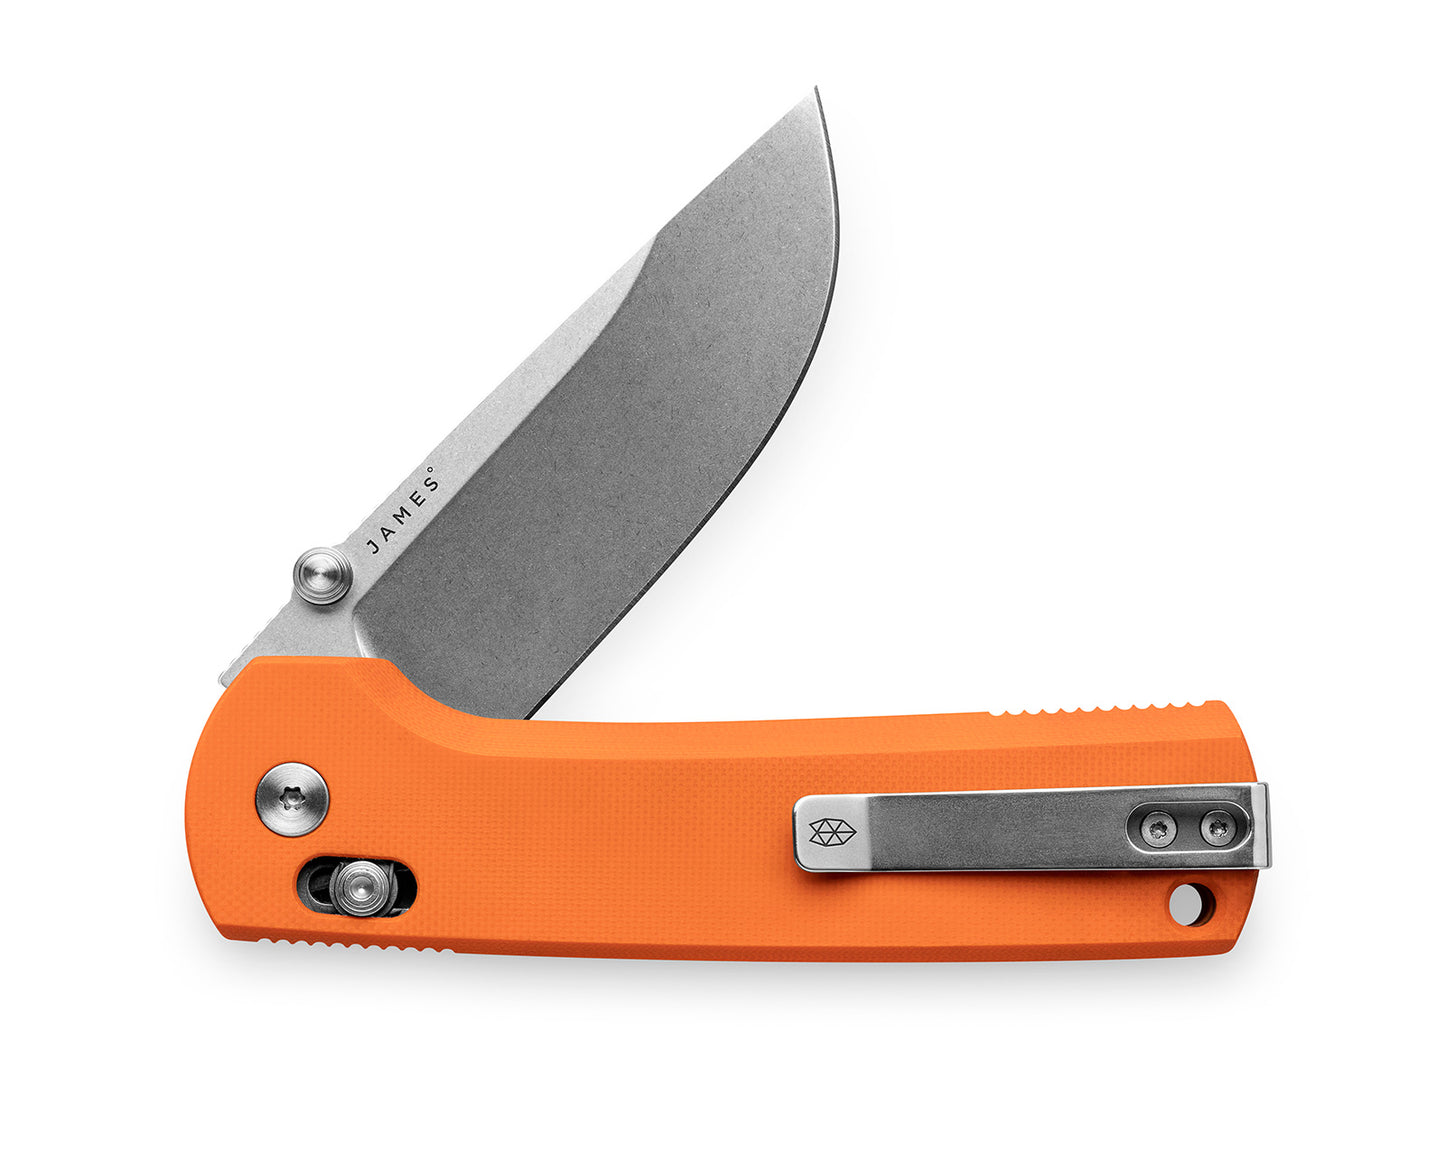 The Kline knife with orange handle with stainless steel blade.